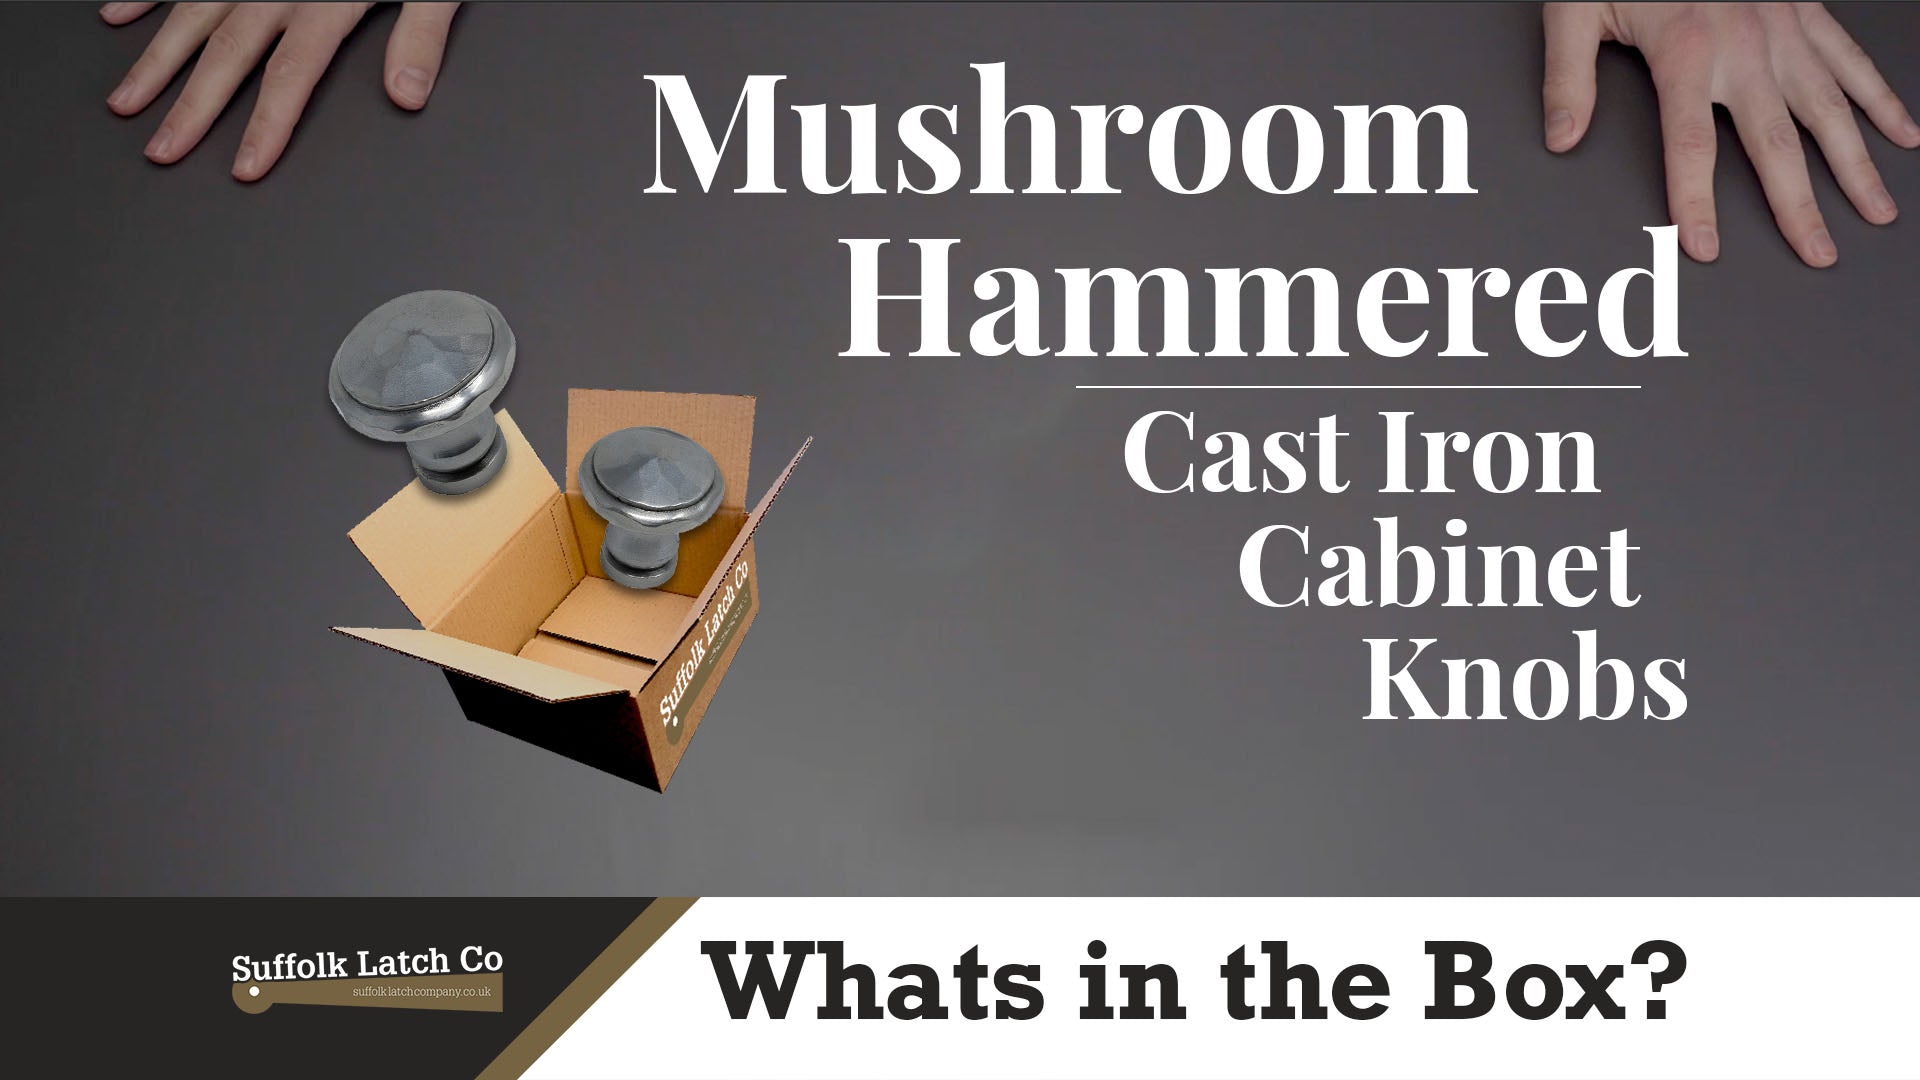 What's In The Box: Cast Iron Mushroom Hammered Cabinet Knobs